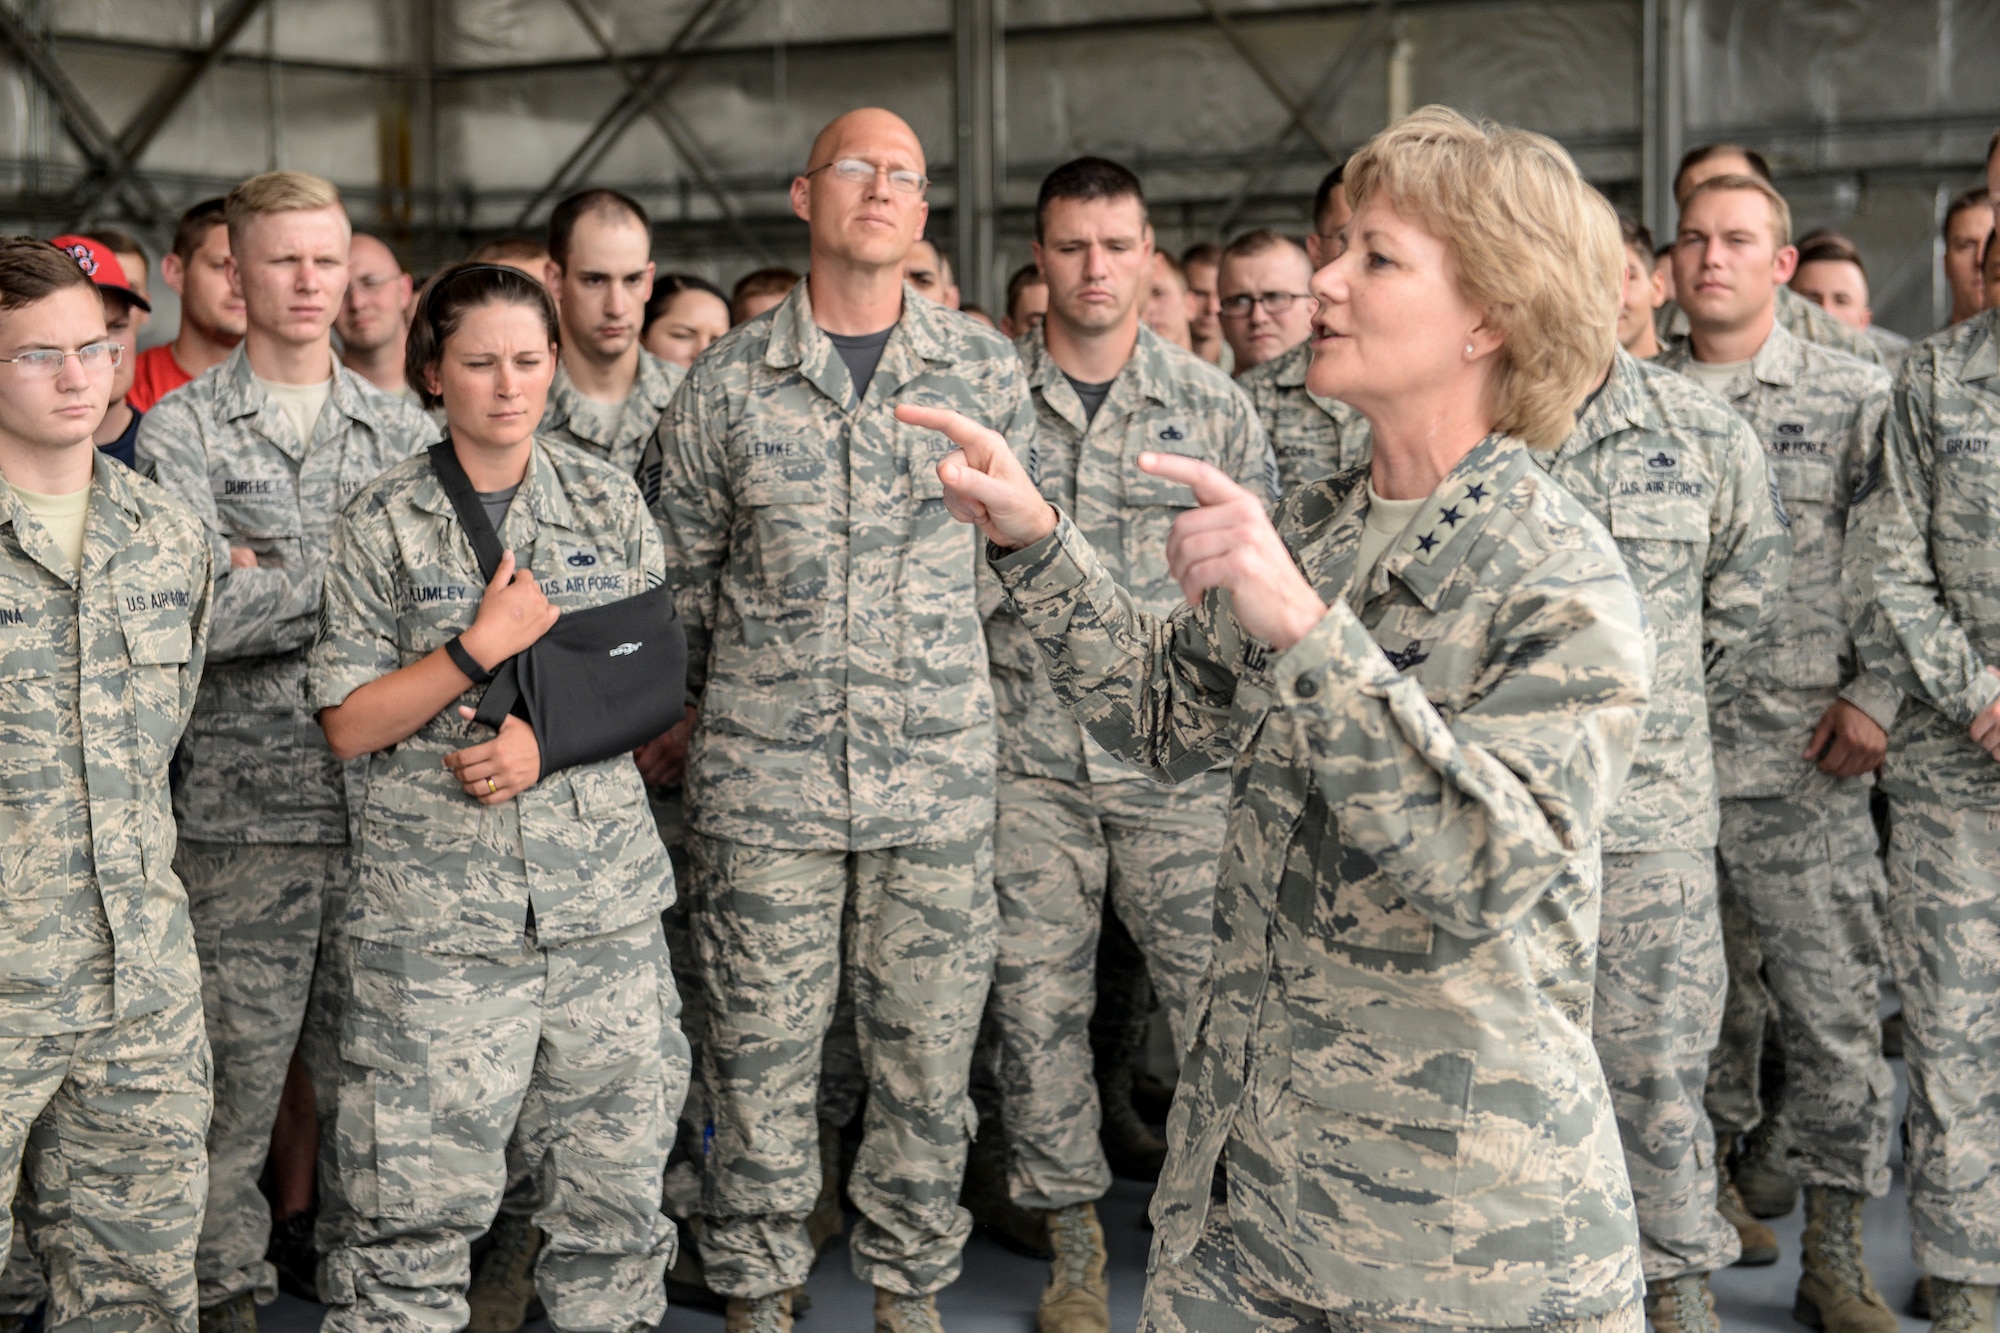 Lt. Gen. Maryanne Miller, Chief of Air Force Reserve and Commander of Air Force Reserve Command, talks to Airmen during a tour of Hill Air Force Base, Utah, Aug. 5. Her first base visit since taking command in July, Miller attended a ceremony to celebrate the F-35A being declared combat ready, then visited some of the Airmen who helped bring the Air Force's newest fighter jet to initial operational capability. (U.S. Air Force photo/Paul Holcomb)